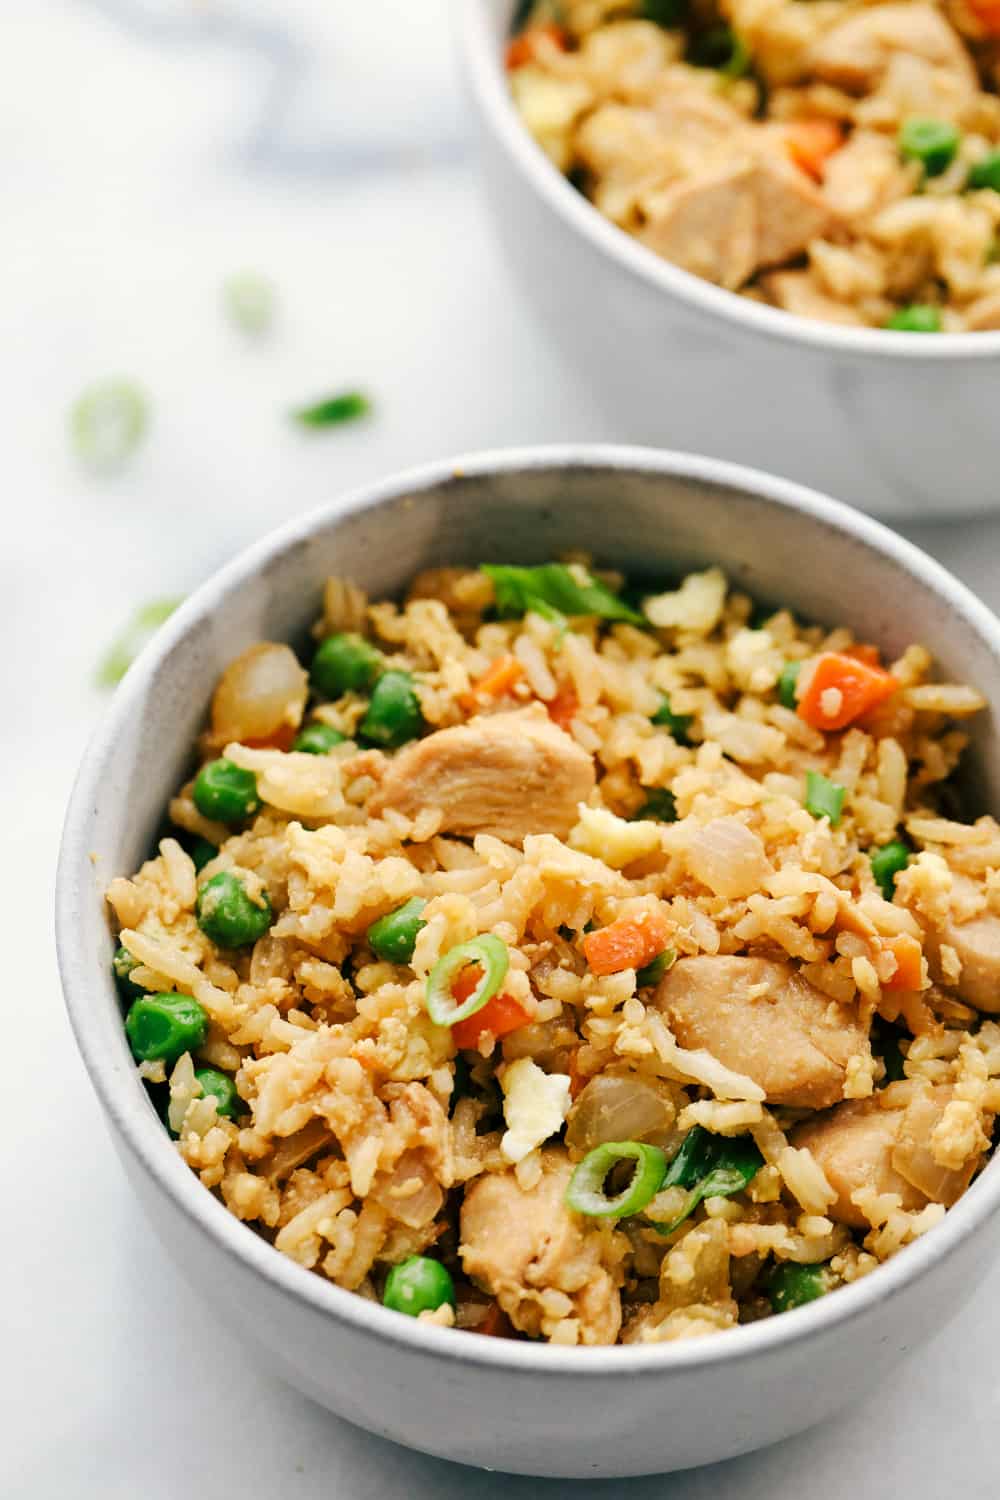 Top 3 Chicken Fried Rice Recipes